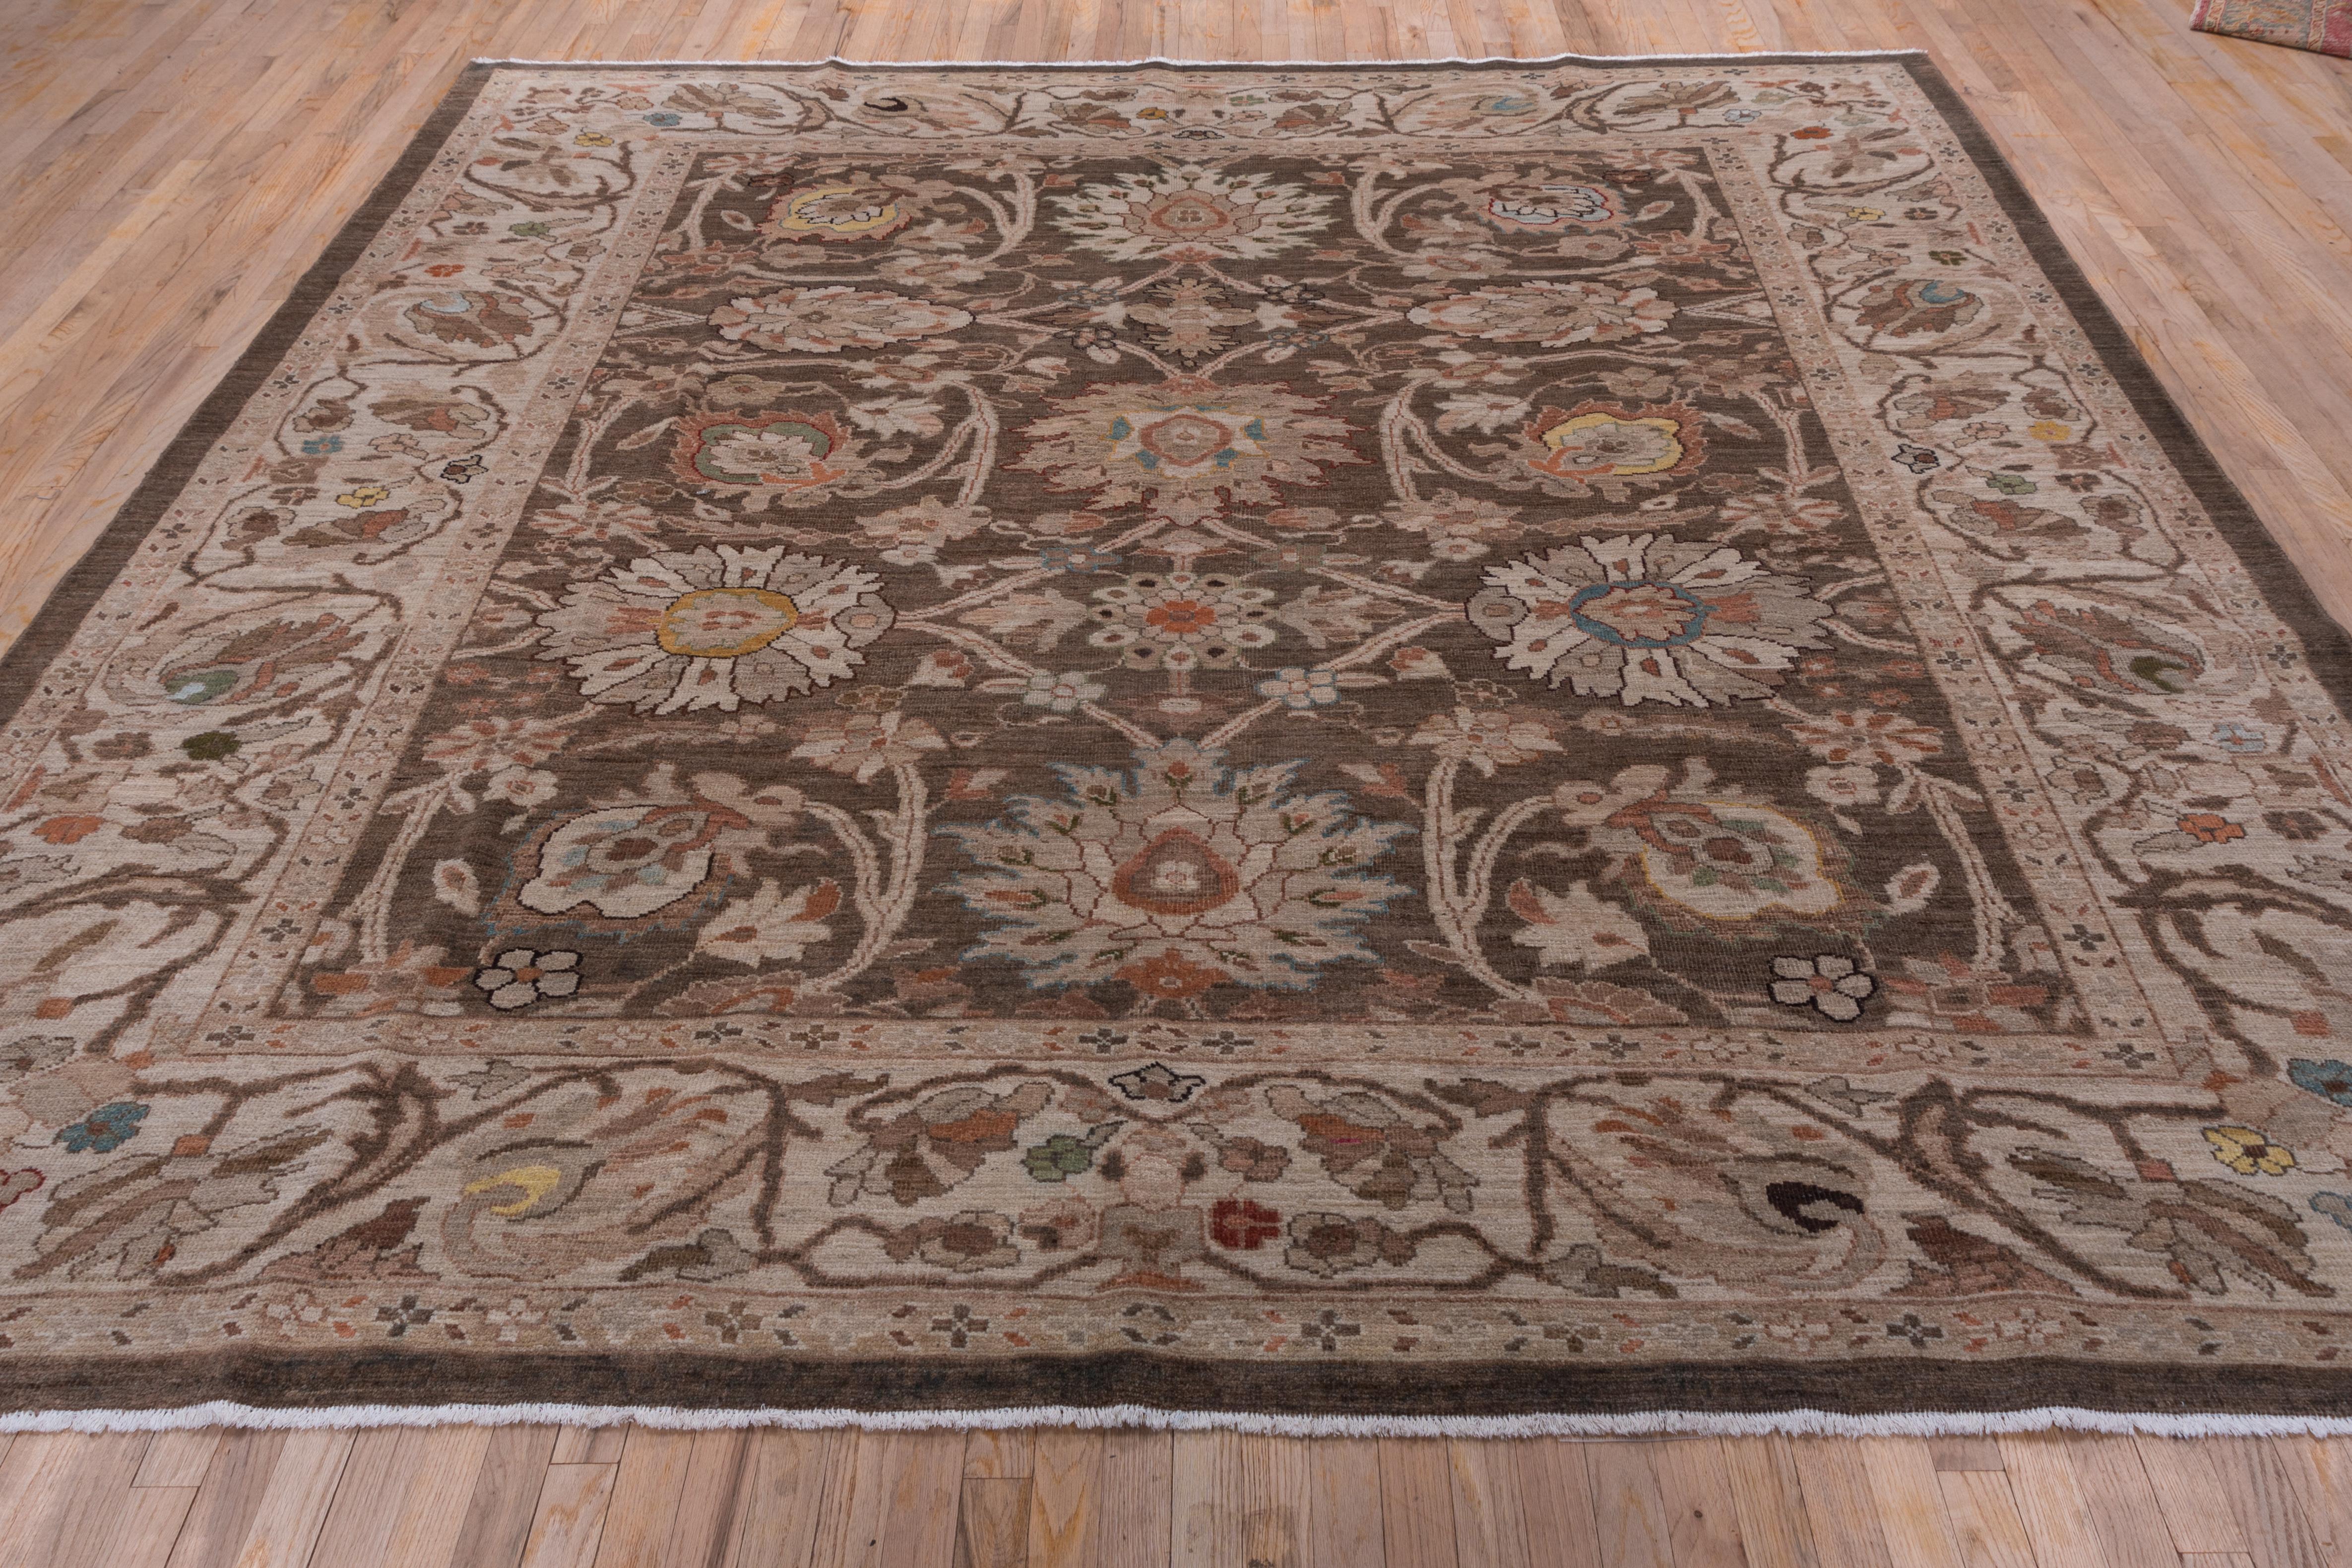 Brown Square Persian Sultanabad Carpet In Good Condition For Sale In New York, NY